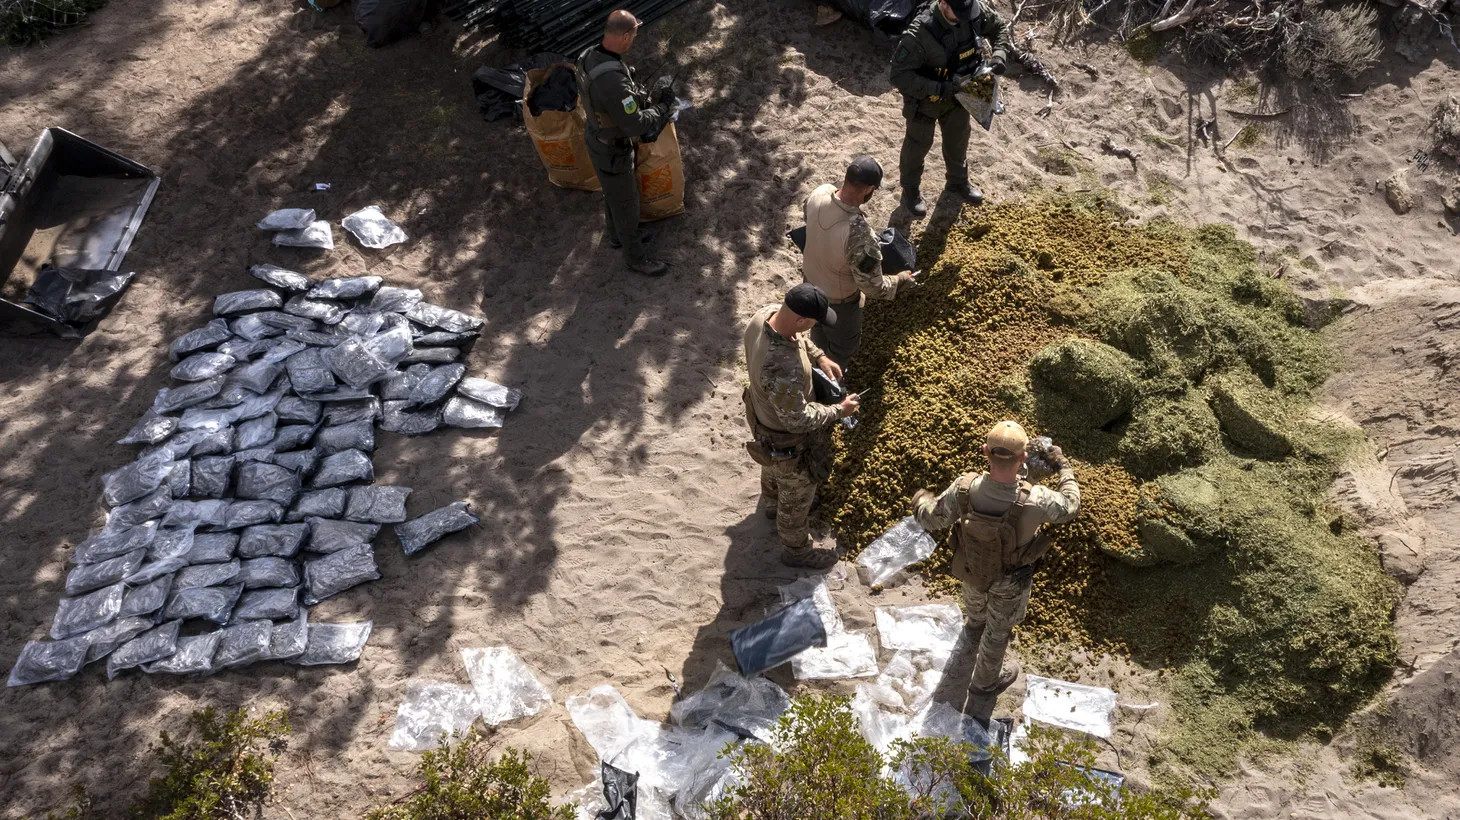 Law enforcement officers raid an illegal cannabis farm in Siskiyou County’s Mount Shasta Vista. They found hundreds of pounds of processed and unprocessed cannabis.